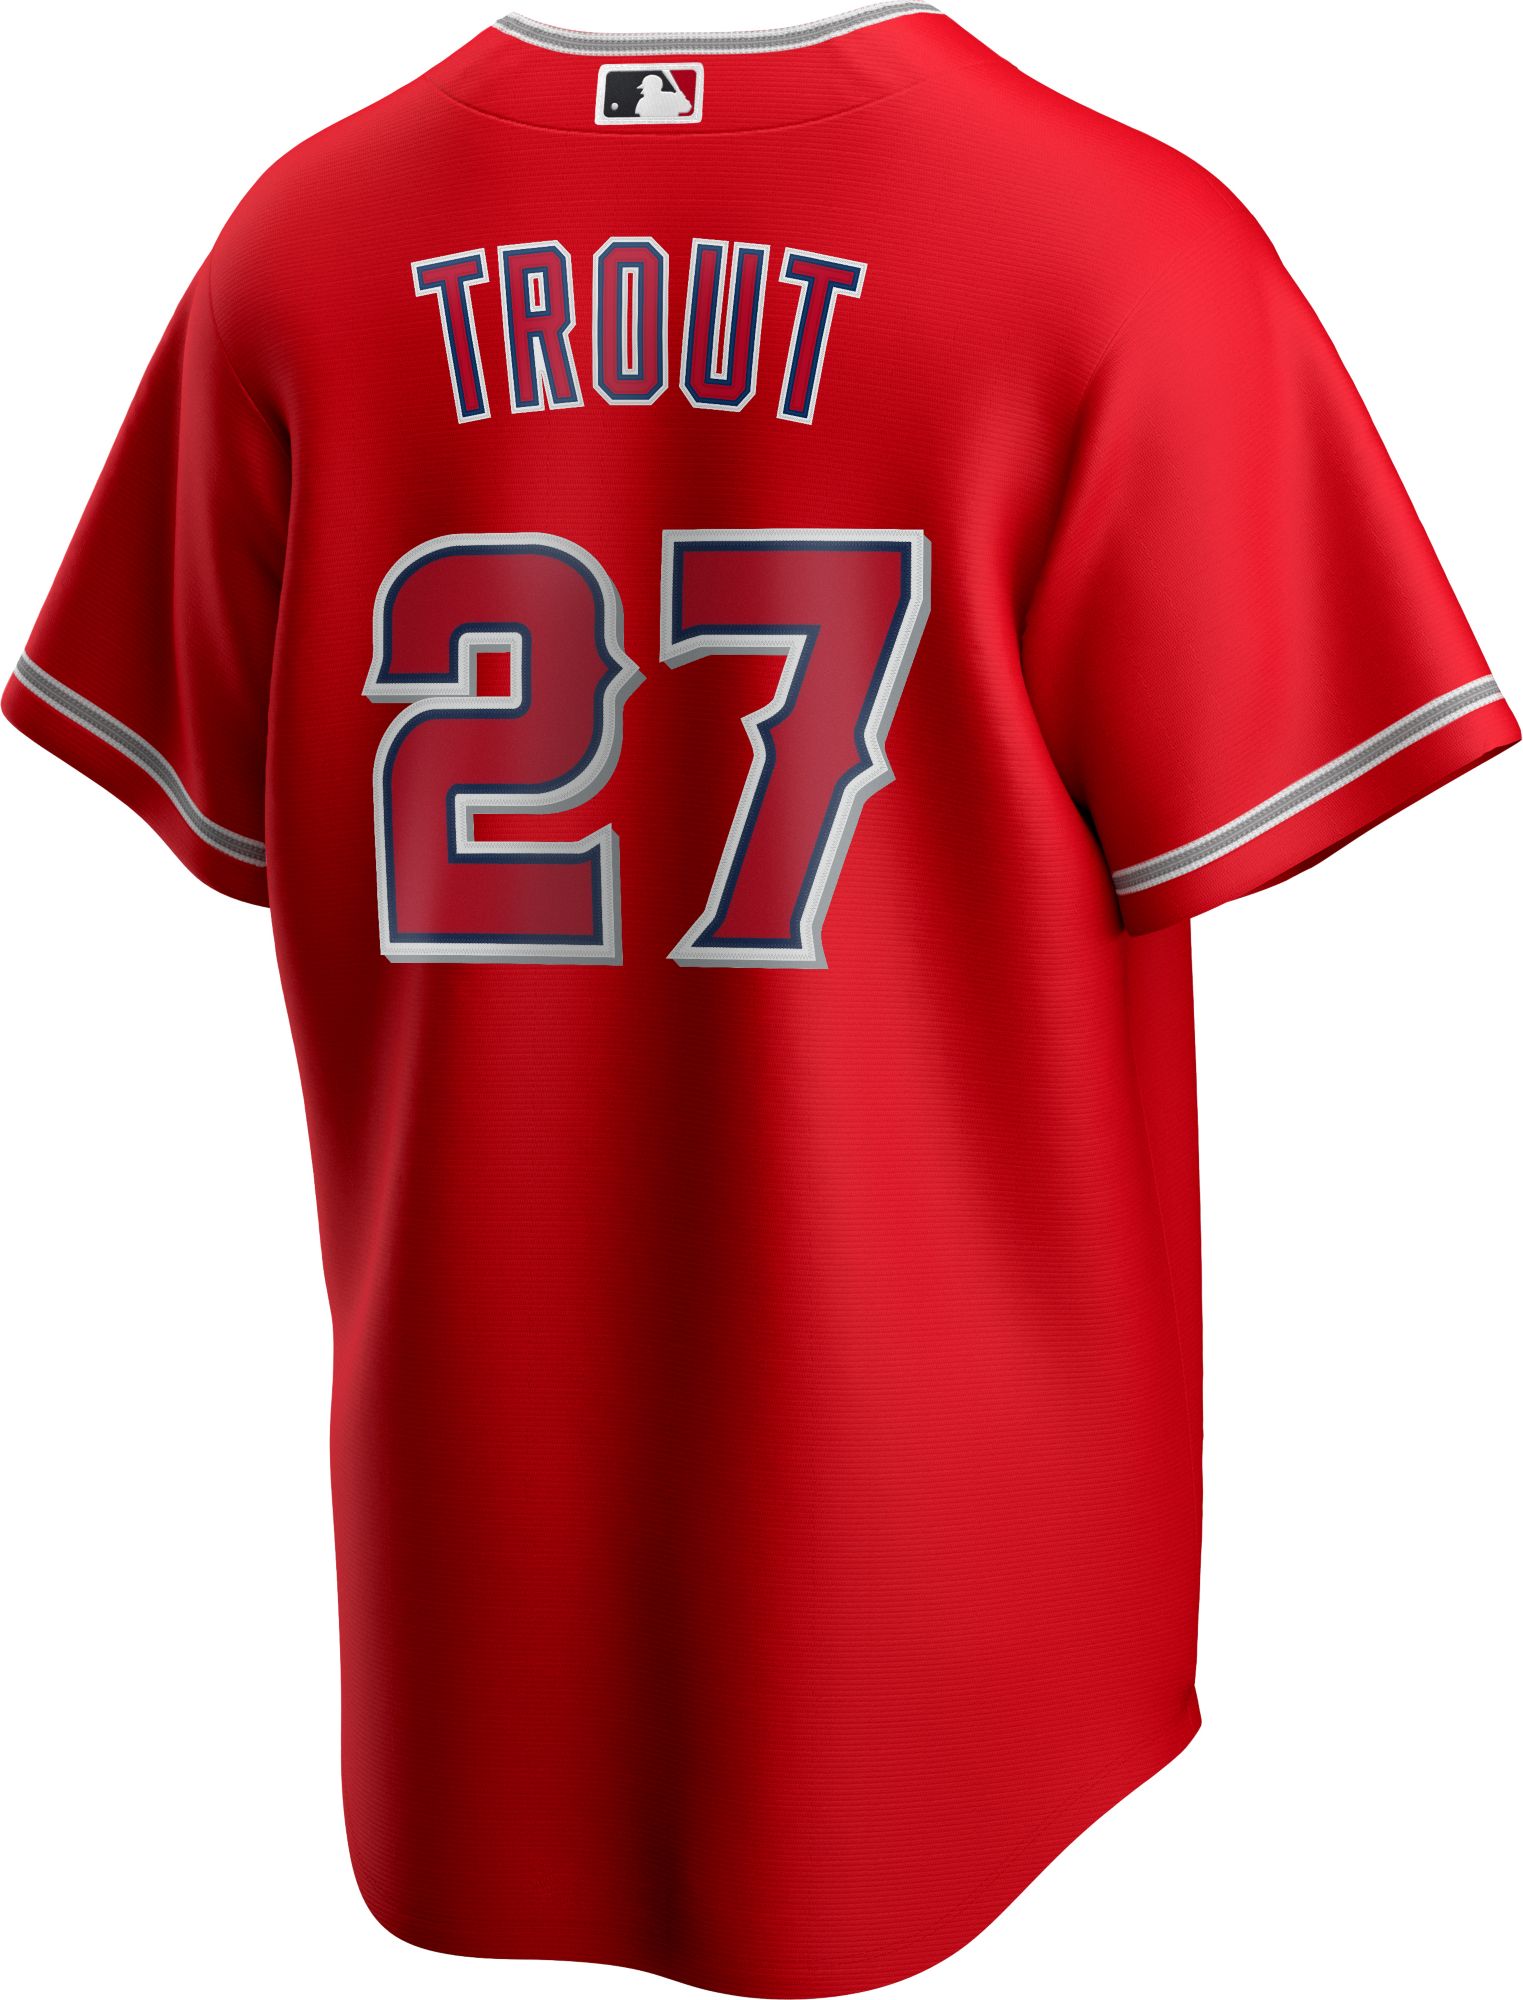 Mike Trout Angels Jersey Black XL & XXL Available for Sale in